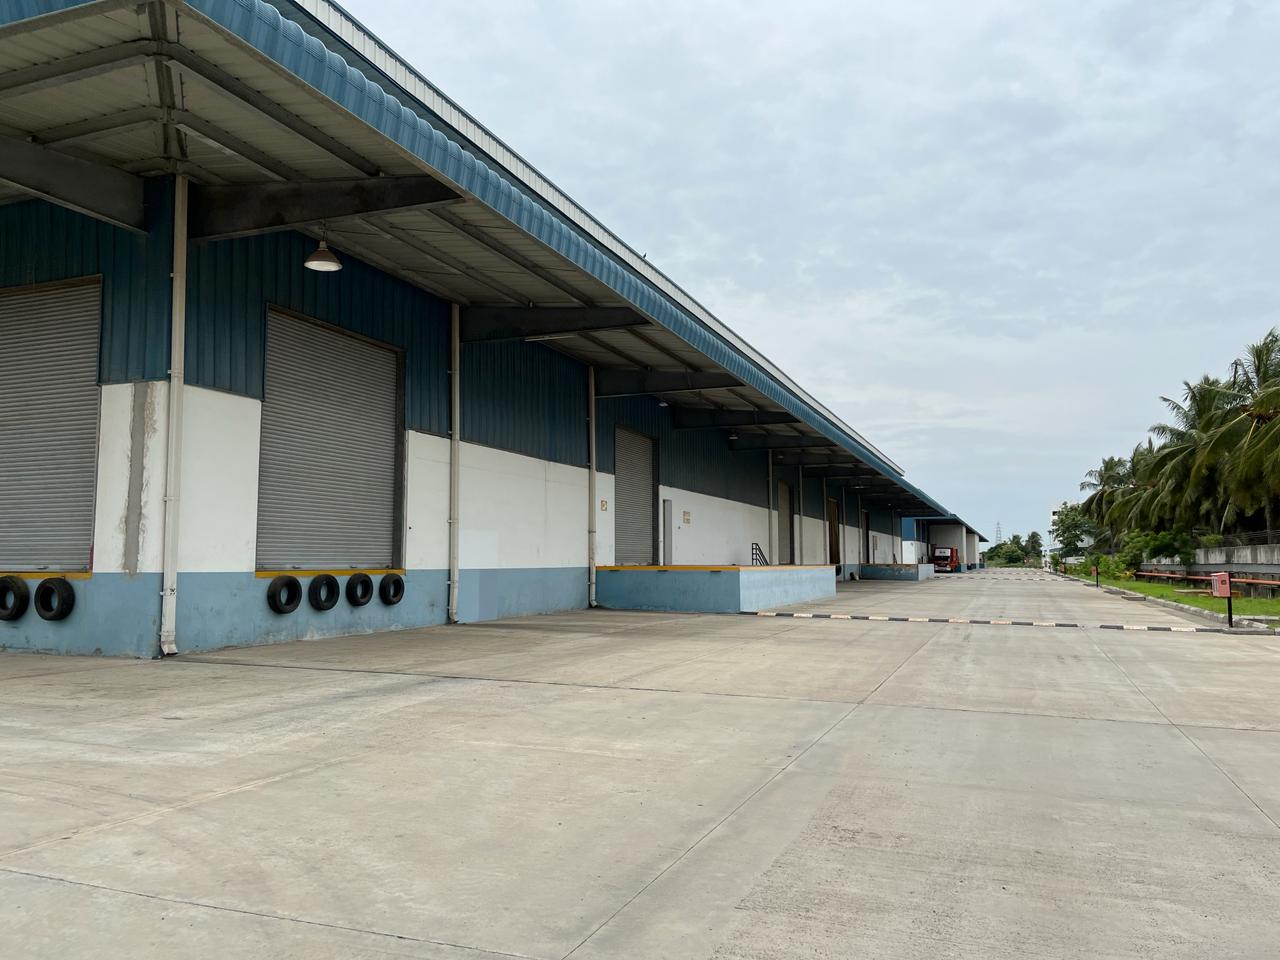 52000 Sq Feet Industrial/Commercial Space for Rent Only in Ambattur Industrial Estate